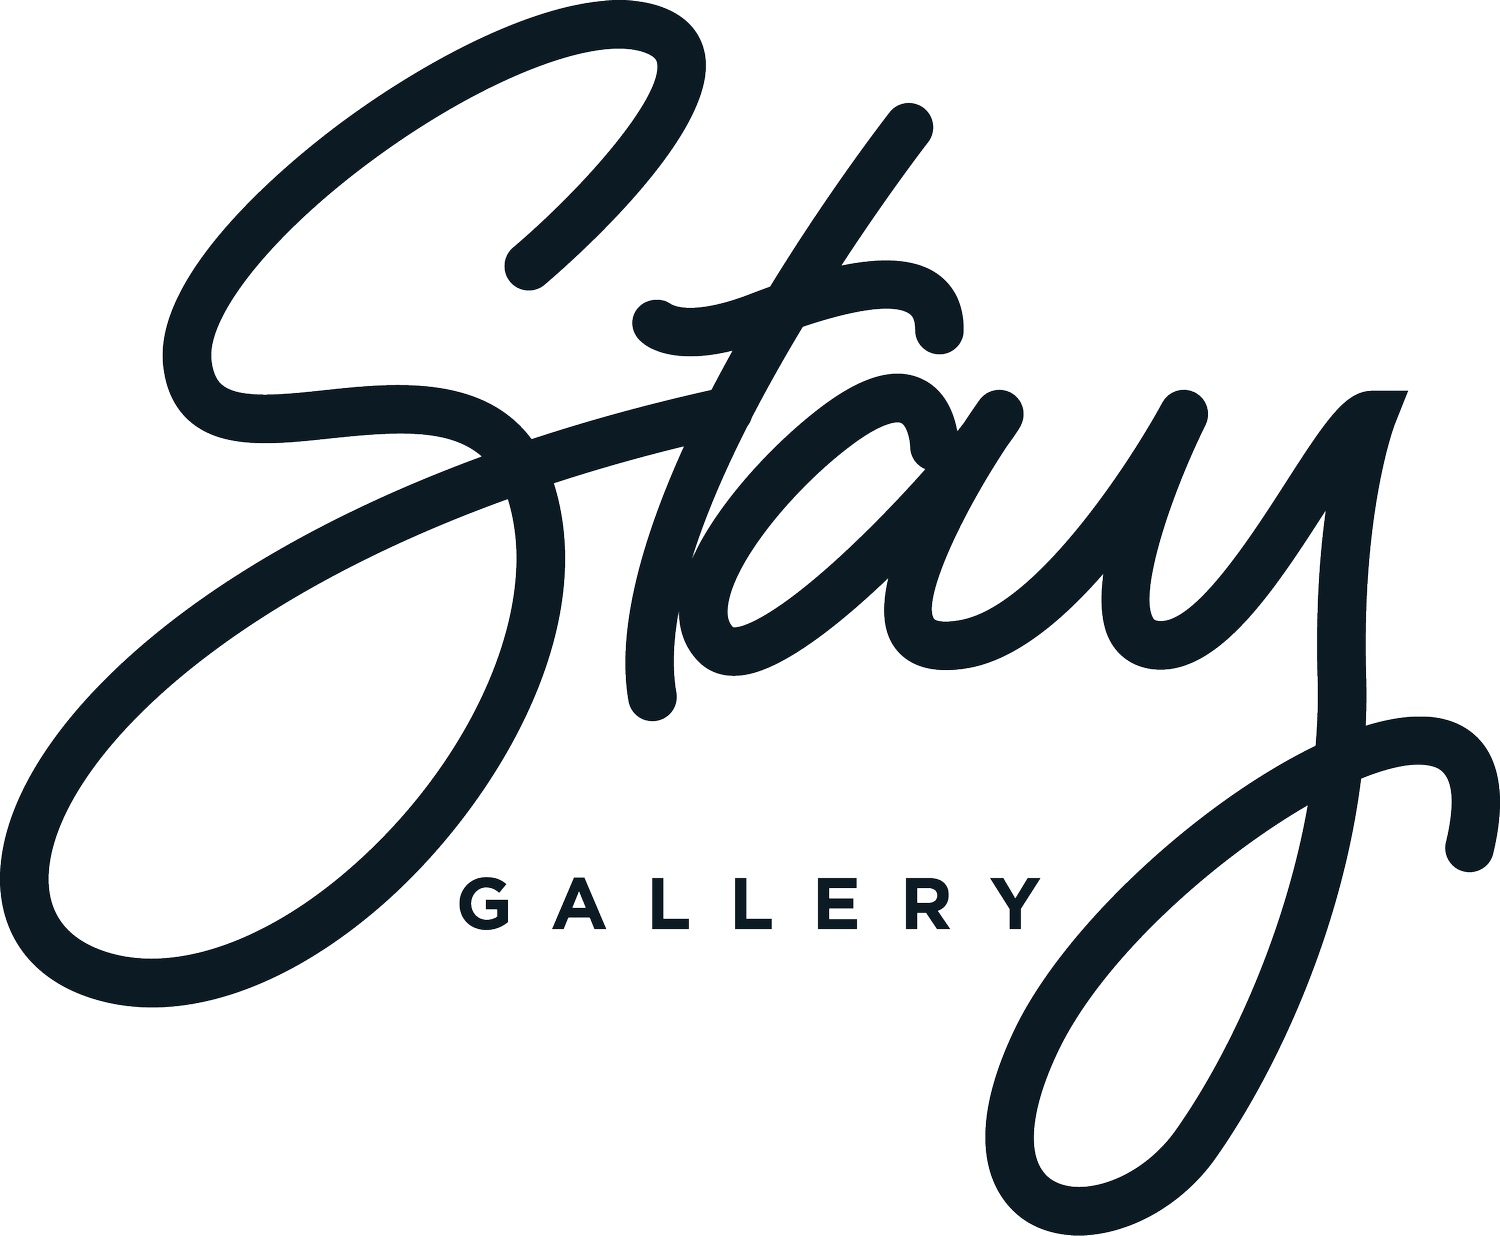 Stay Gallery